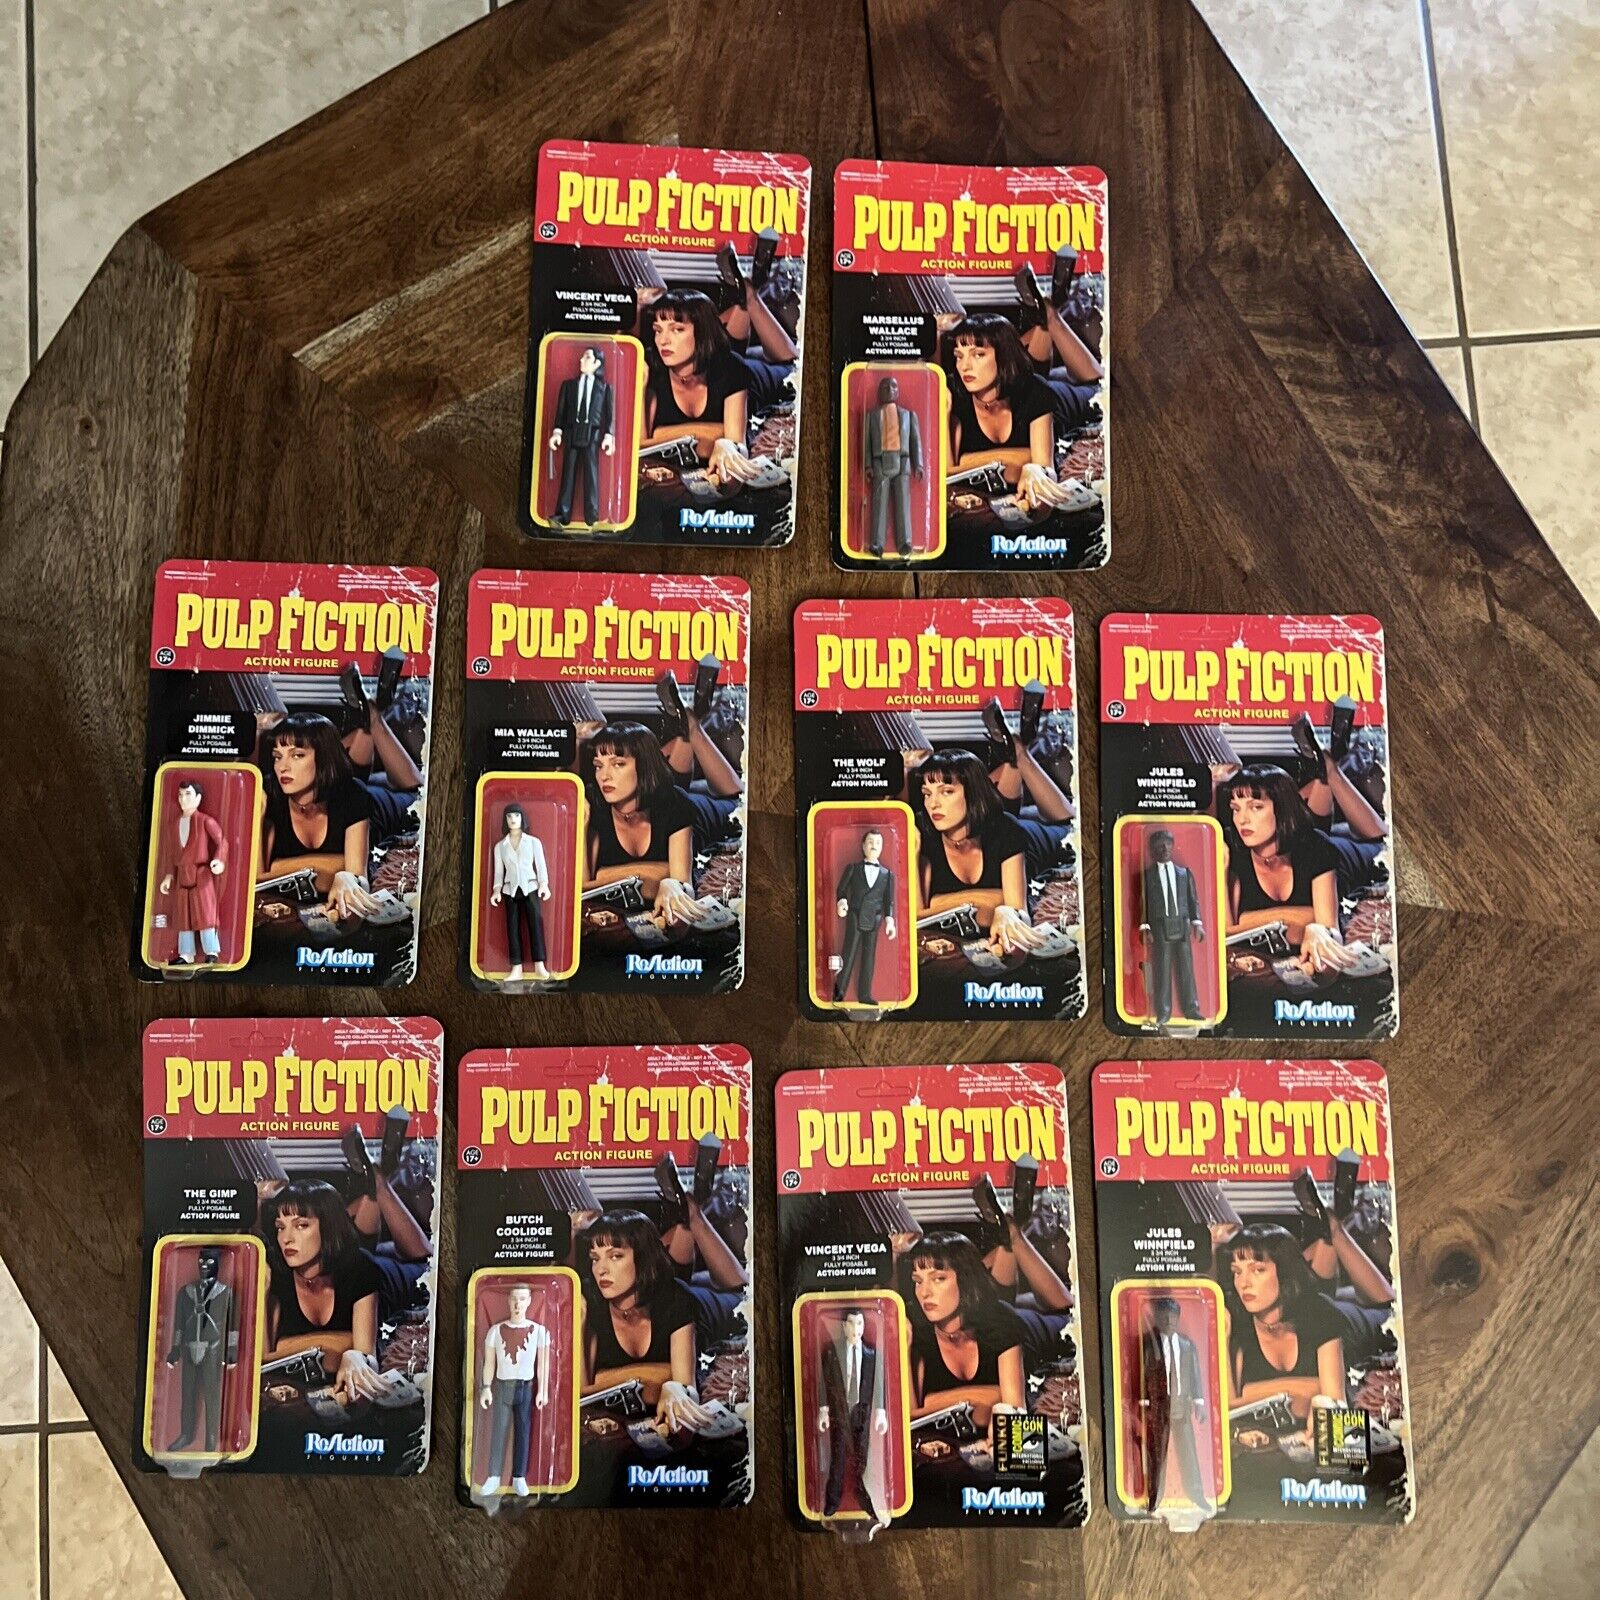 FUNKO ReAction Pulp Fiction unpunched complete set of 8 + 2 Bloody + Gimp Box